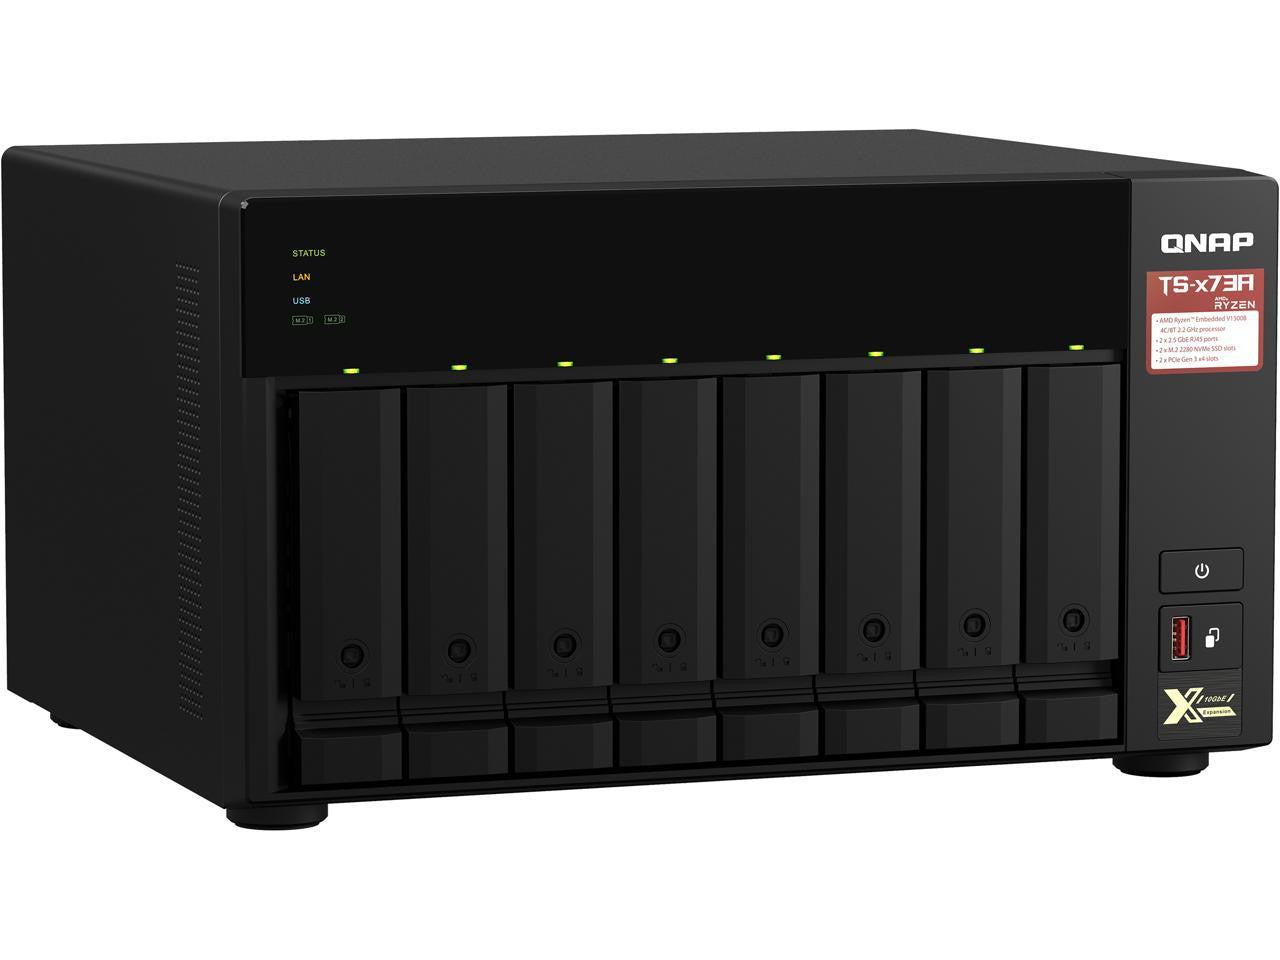 QNAP TS-873A 8-BAY NAS with 32GB DDR4 RAM and 96TB (8x12TB) Seagate Ironwolf NAS Drives Fully Assembled and Tested